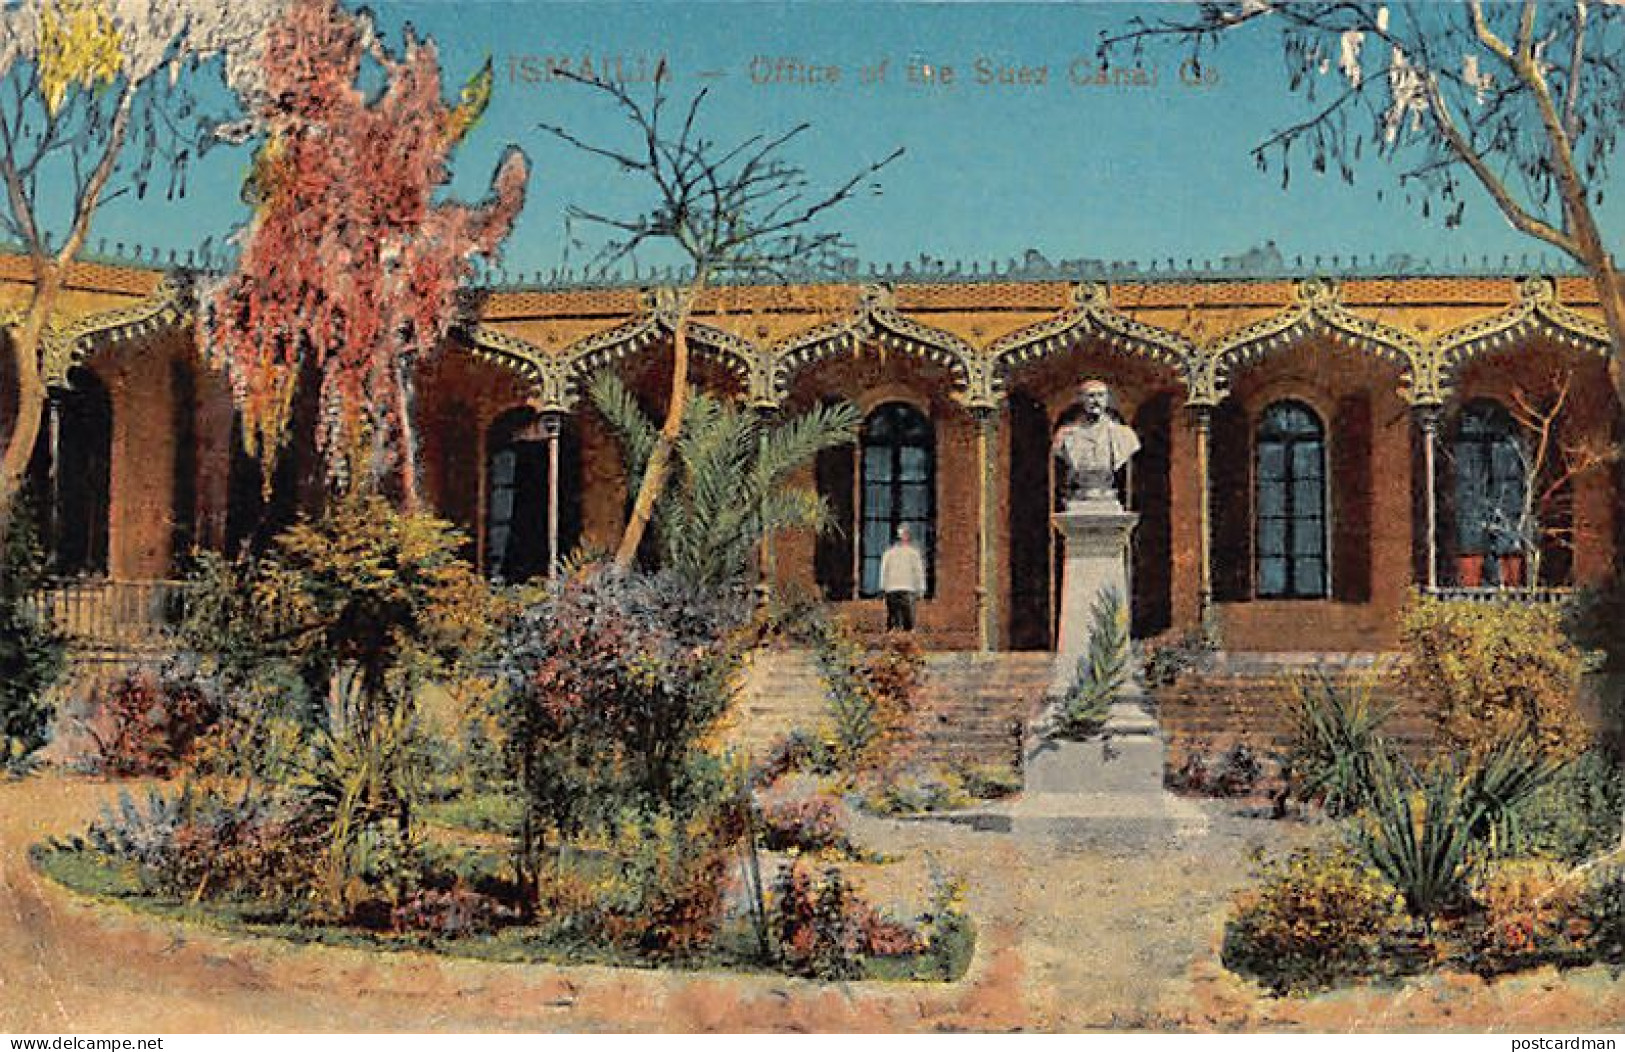 Egypt - ISMAILIA - Office Of The Suez Canal Co. - Publ. The Cairo Post-Card Trust Serie 649 - 112 - Ismailia